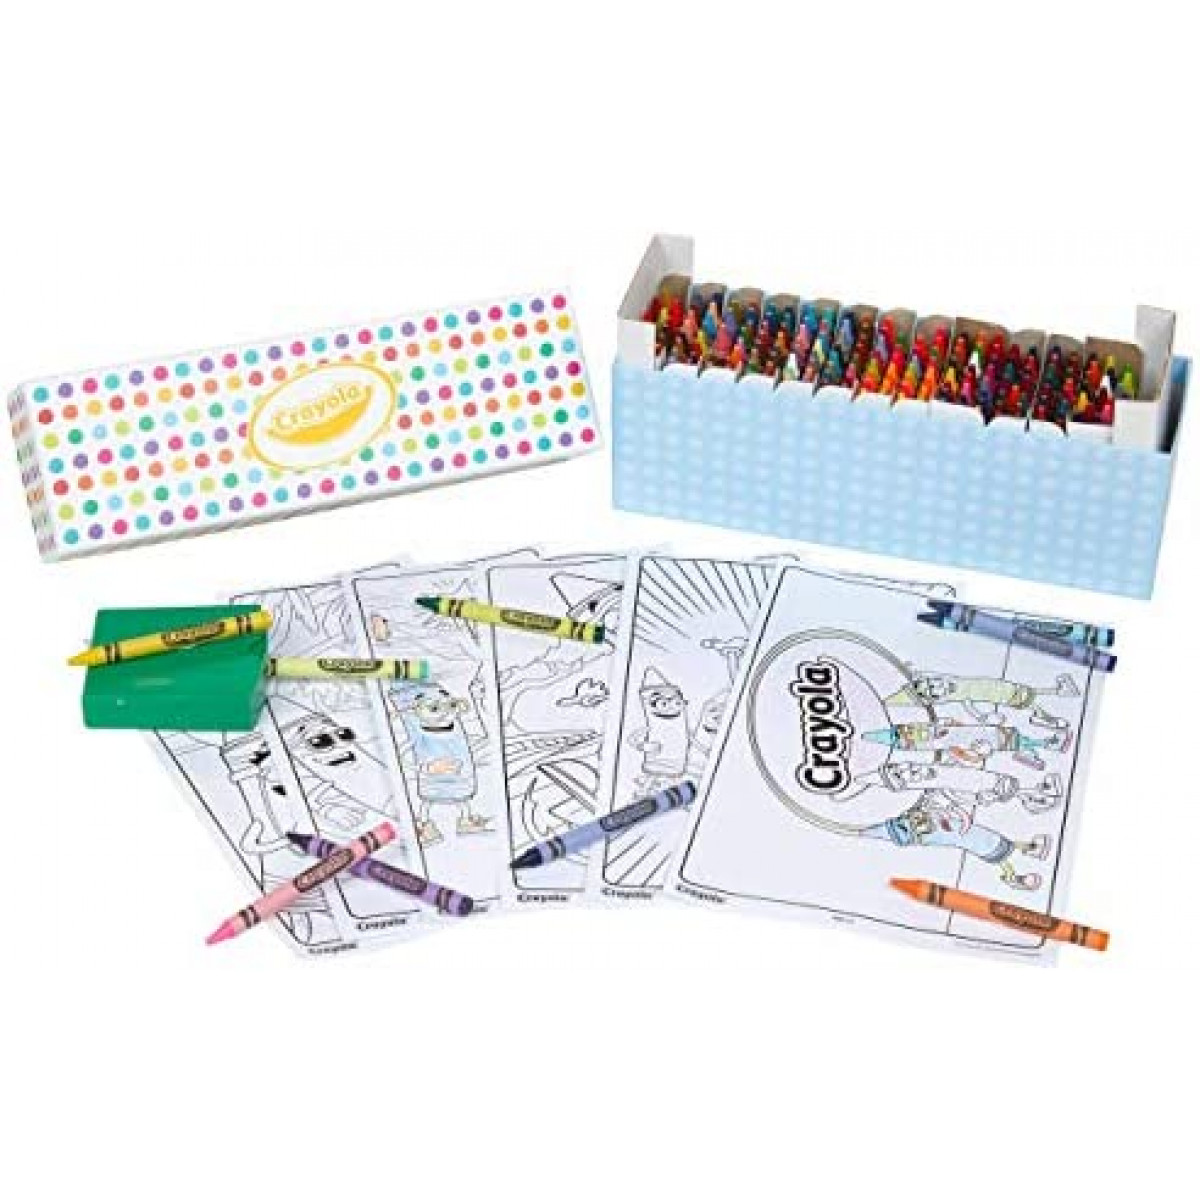 Crayola Crayon Set with Coloring Pages, Gift for Kids